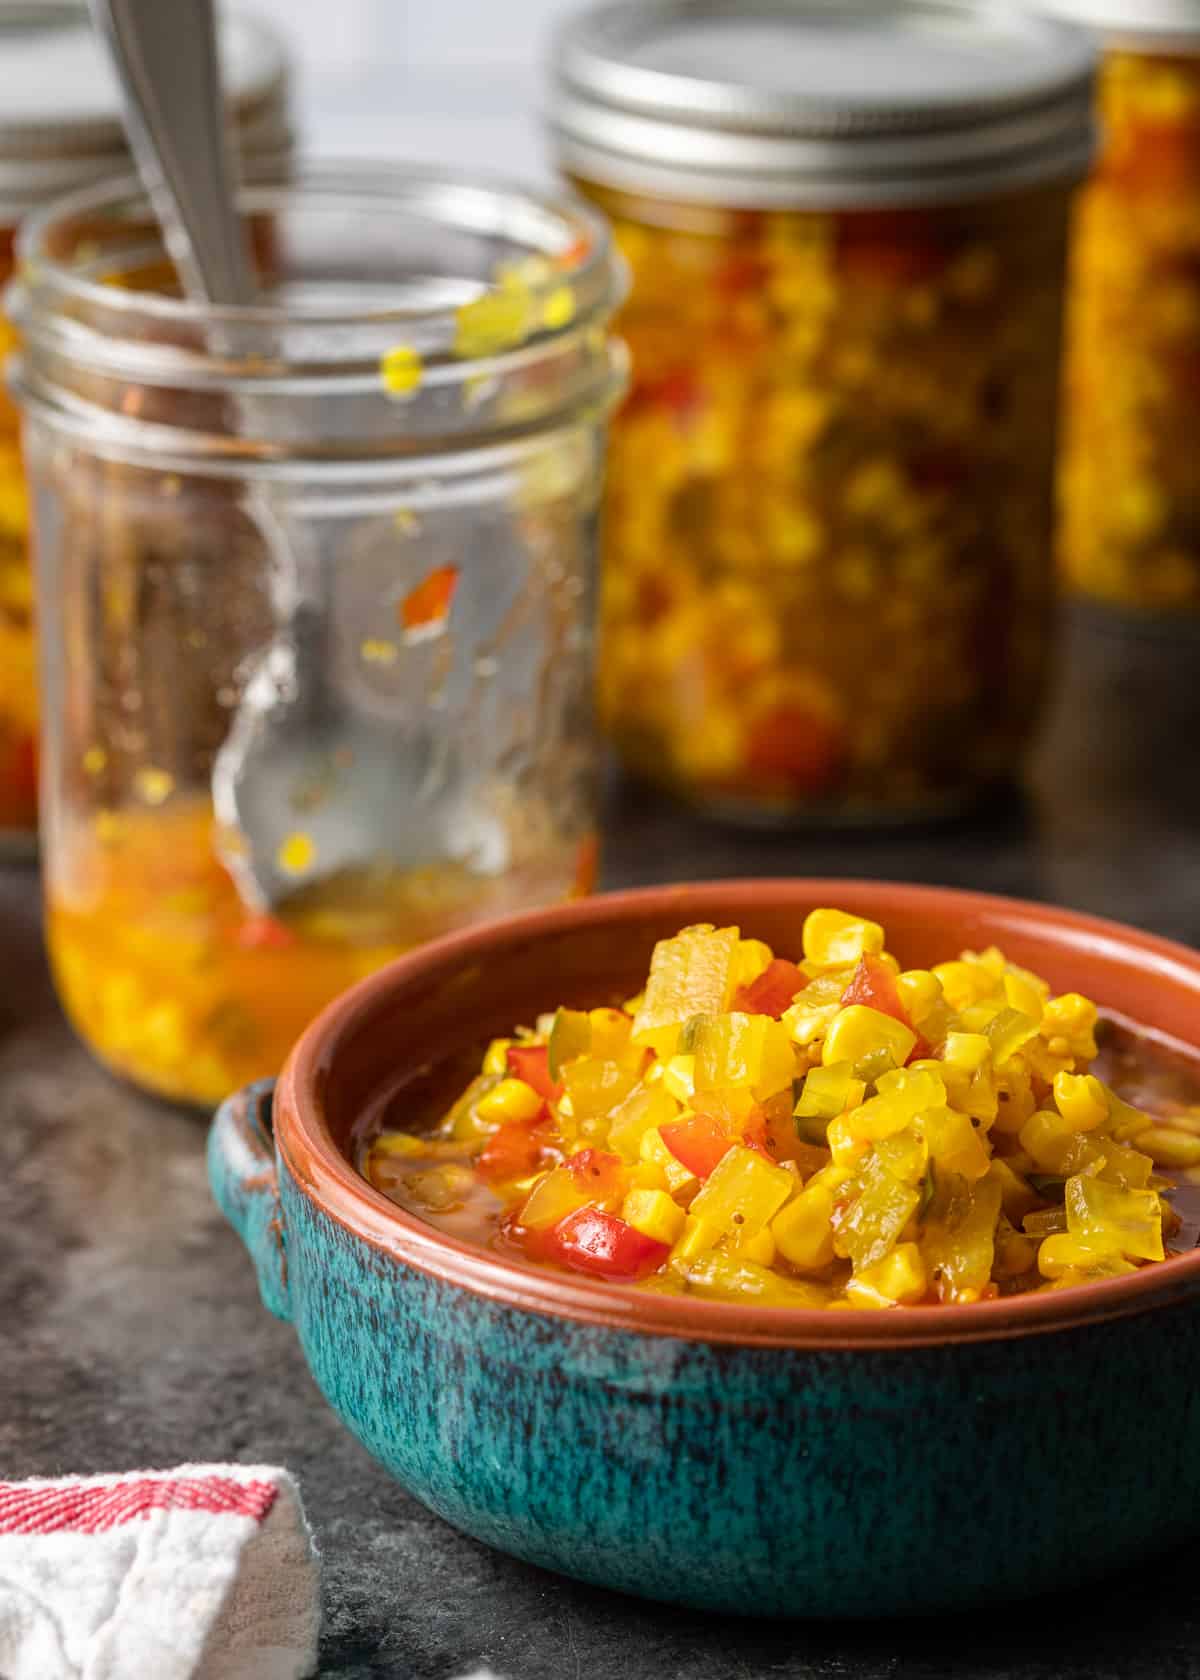 a ceramic bowl of corn relish with a jar visible in the background